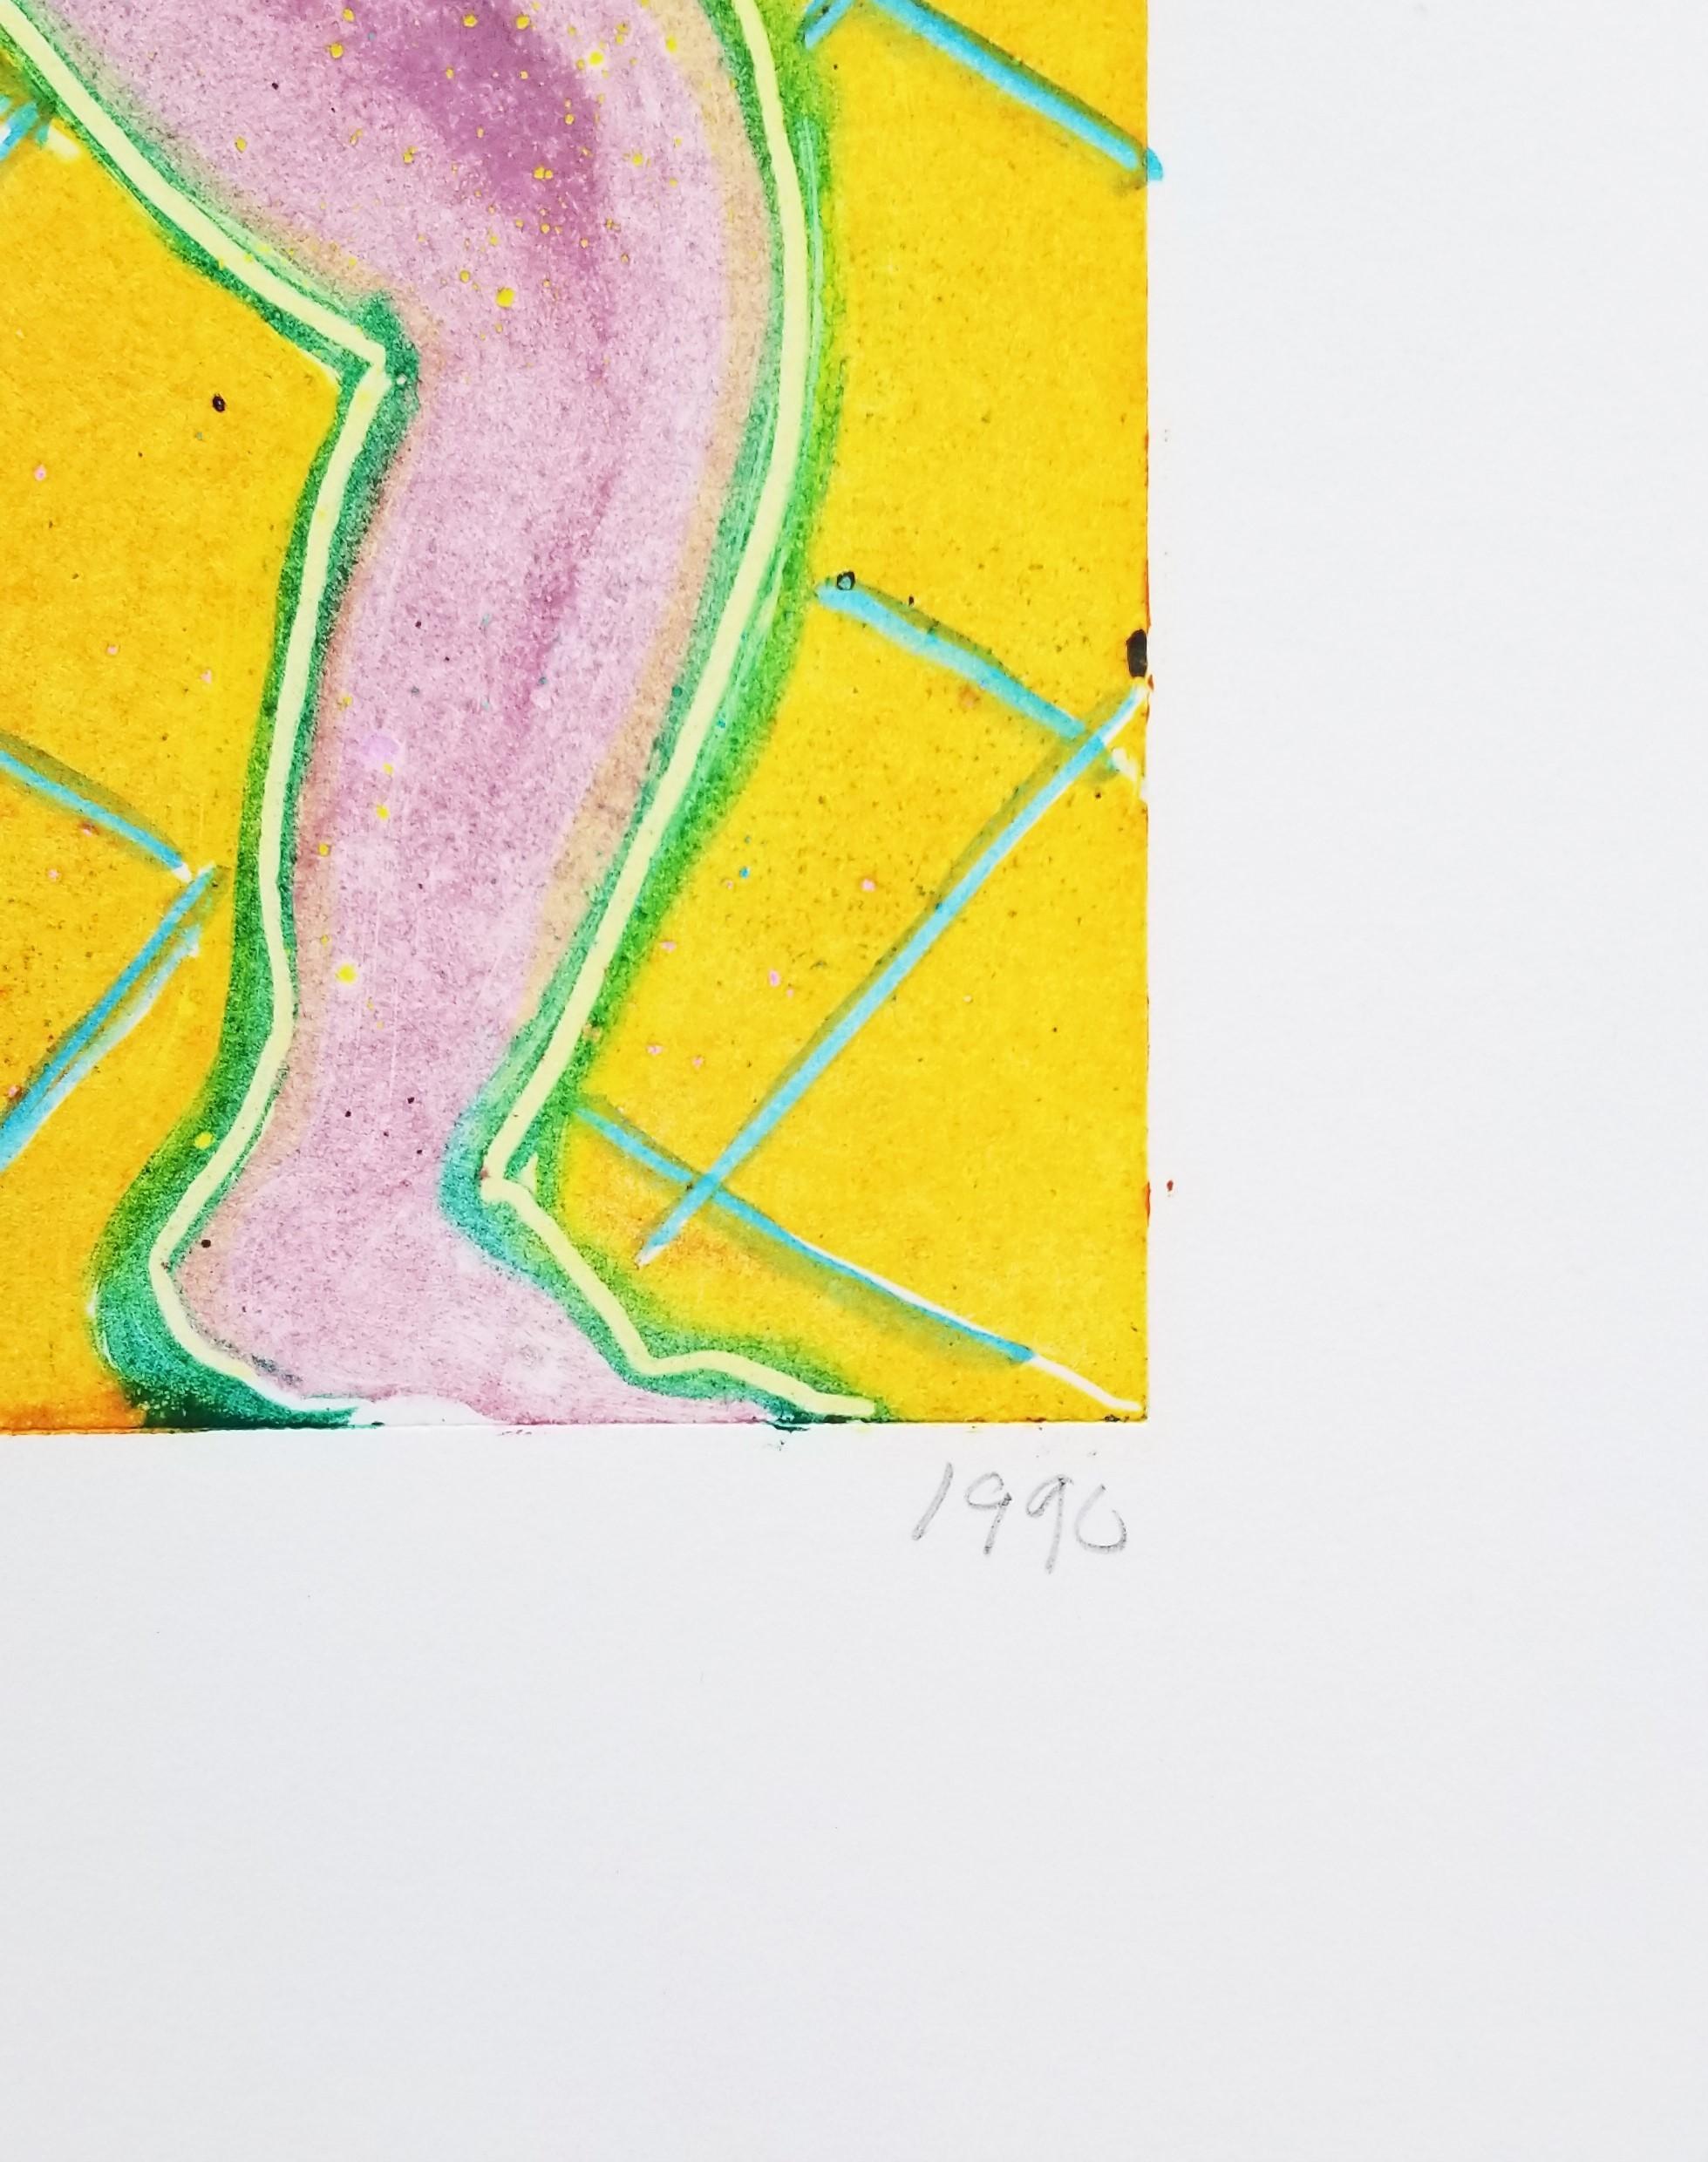 An original signed unique monoprint on unbranded heavy white wove paper by American artist Dan May (1955-) titled 